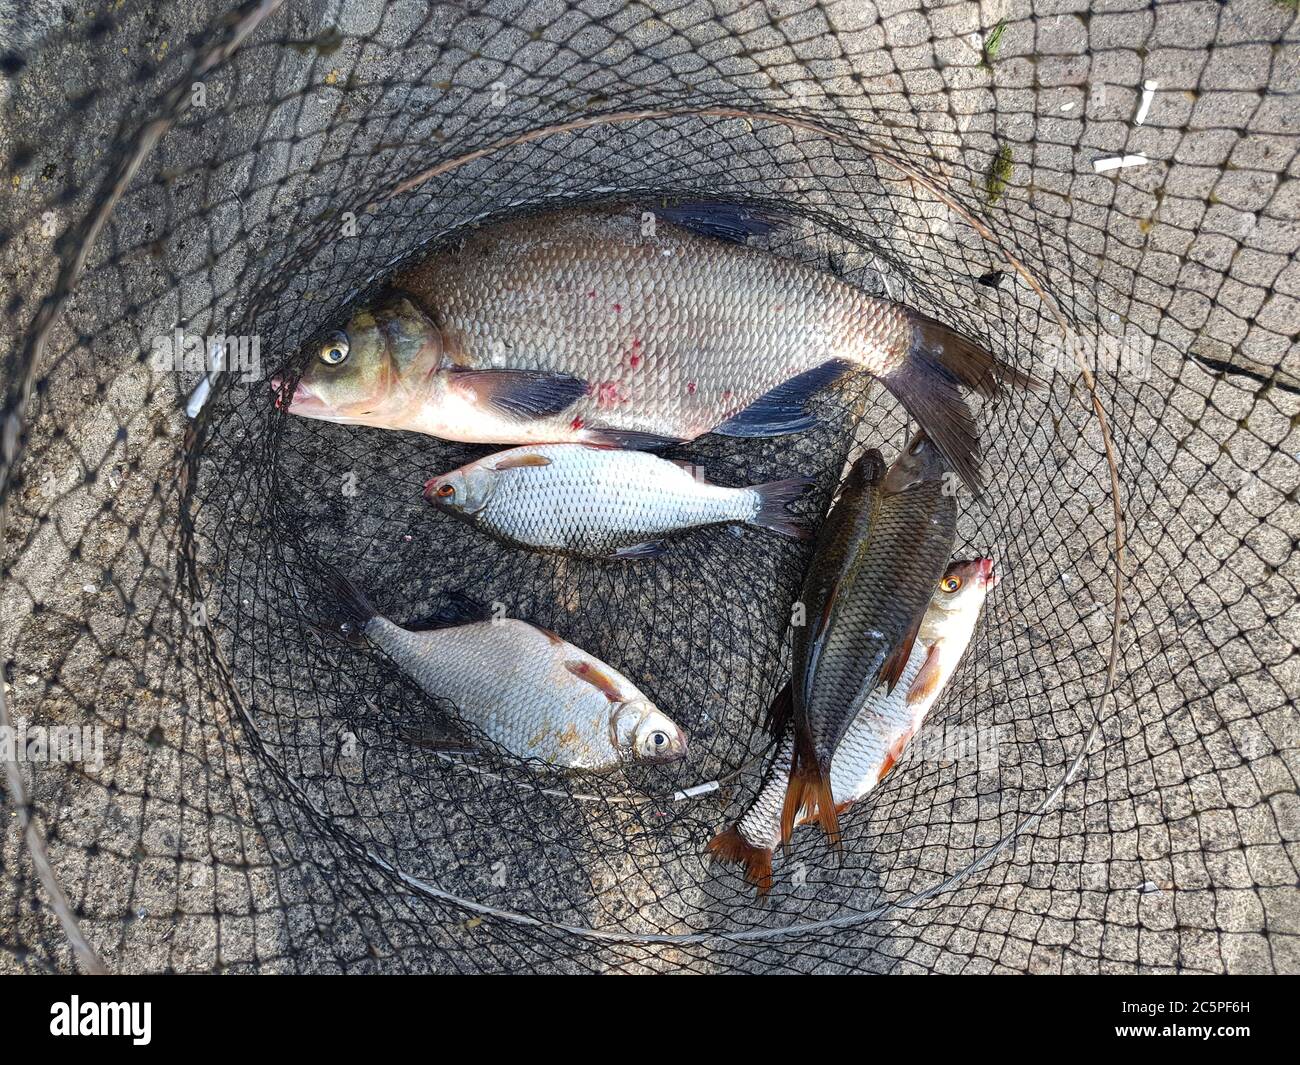 Fishing concept. Freshwater fish on keepnet with fishery catch in